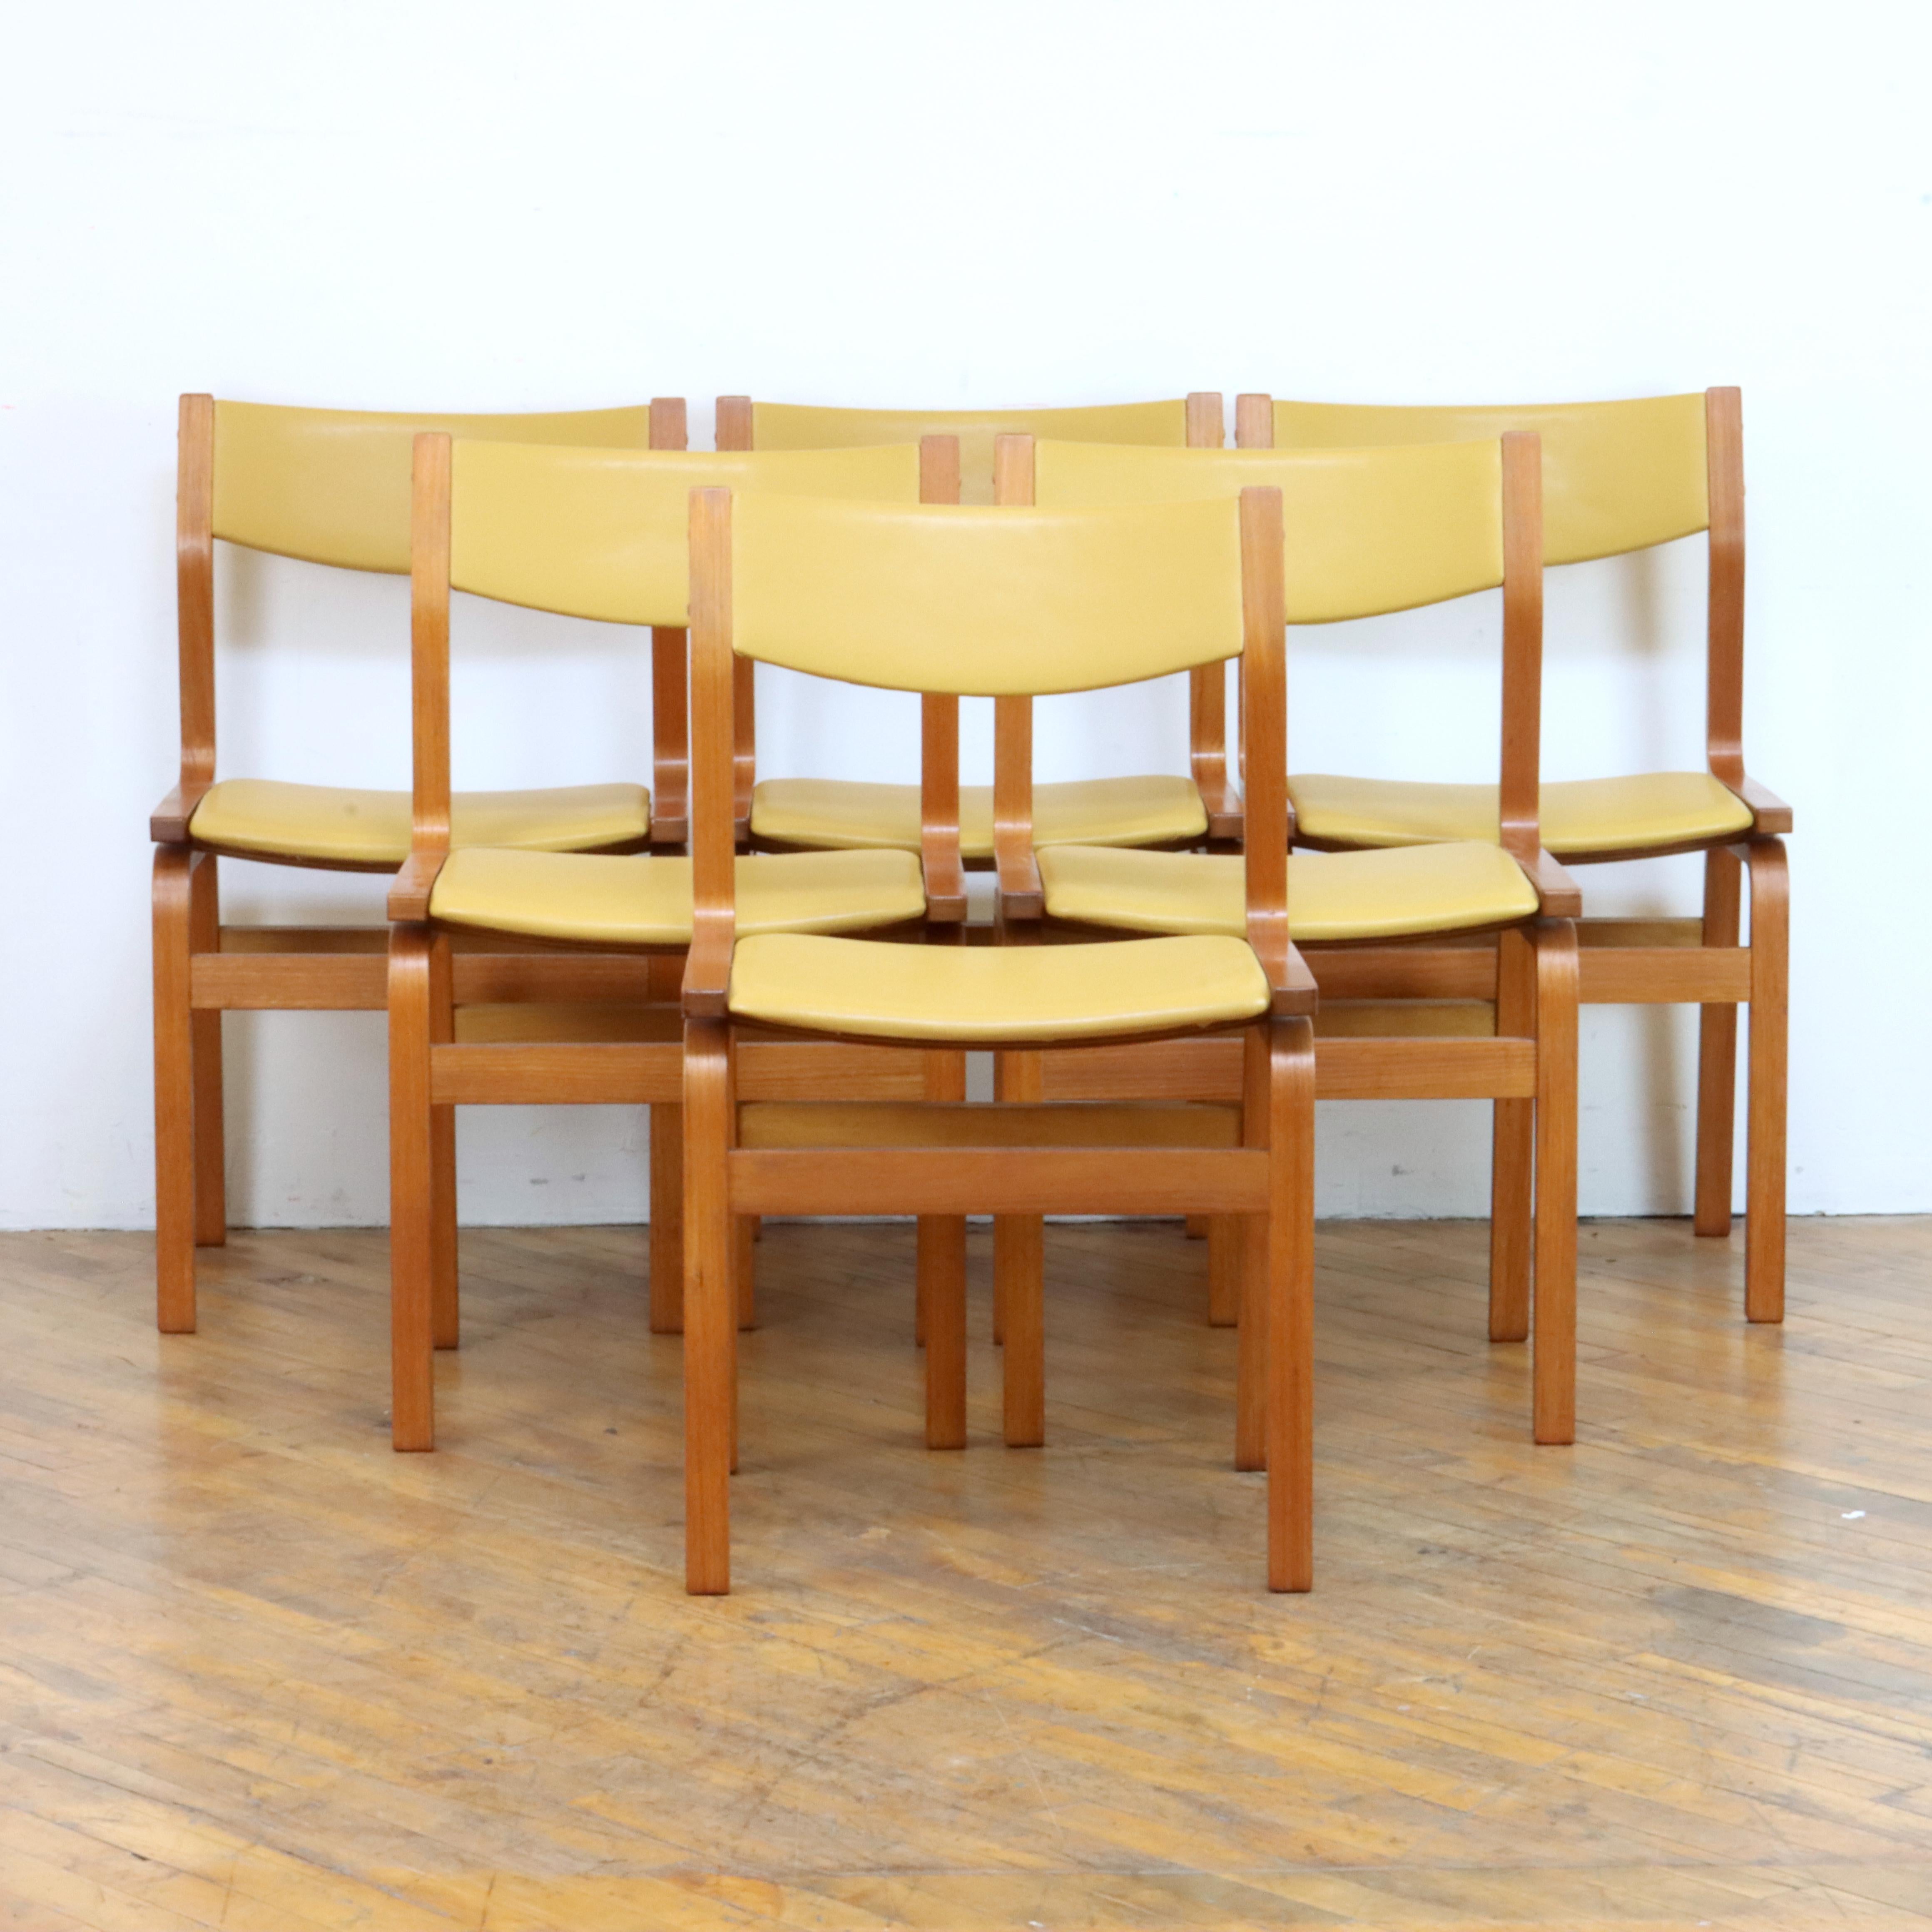 Lovely set of Danish dining chairs after Arne Jacobsen's St. Catherine's chair, designed for St. Catherine's College in Oxford, England. Simple and elegant, the chairs are constructed with teak veneered molded plywood and were just reupholstered in